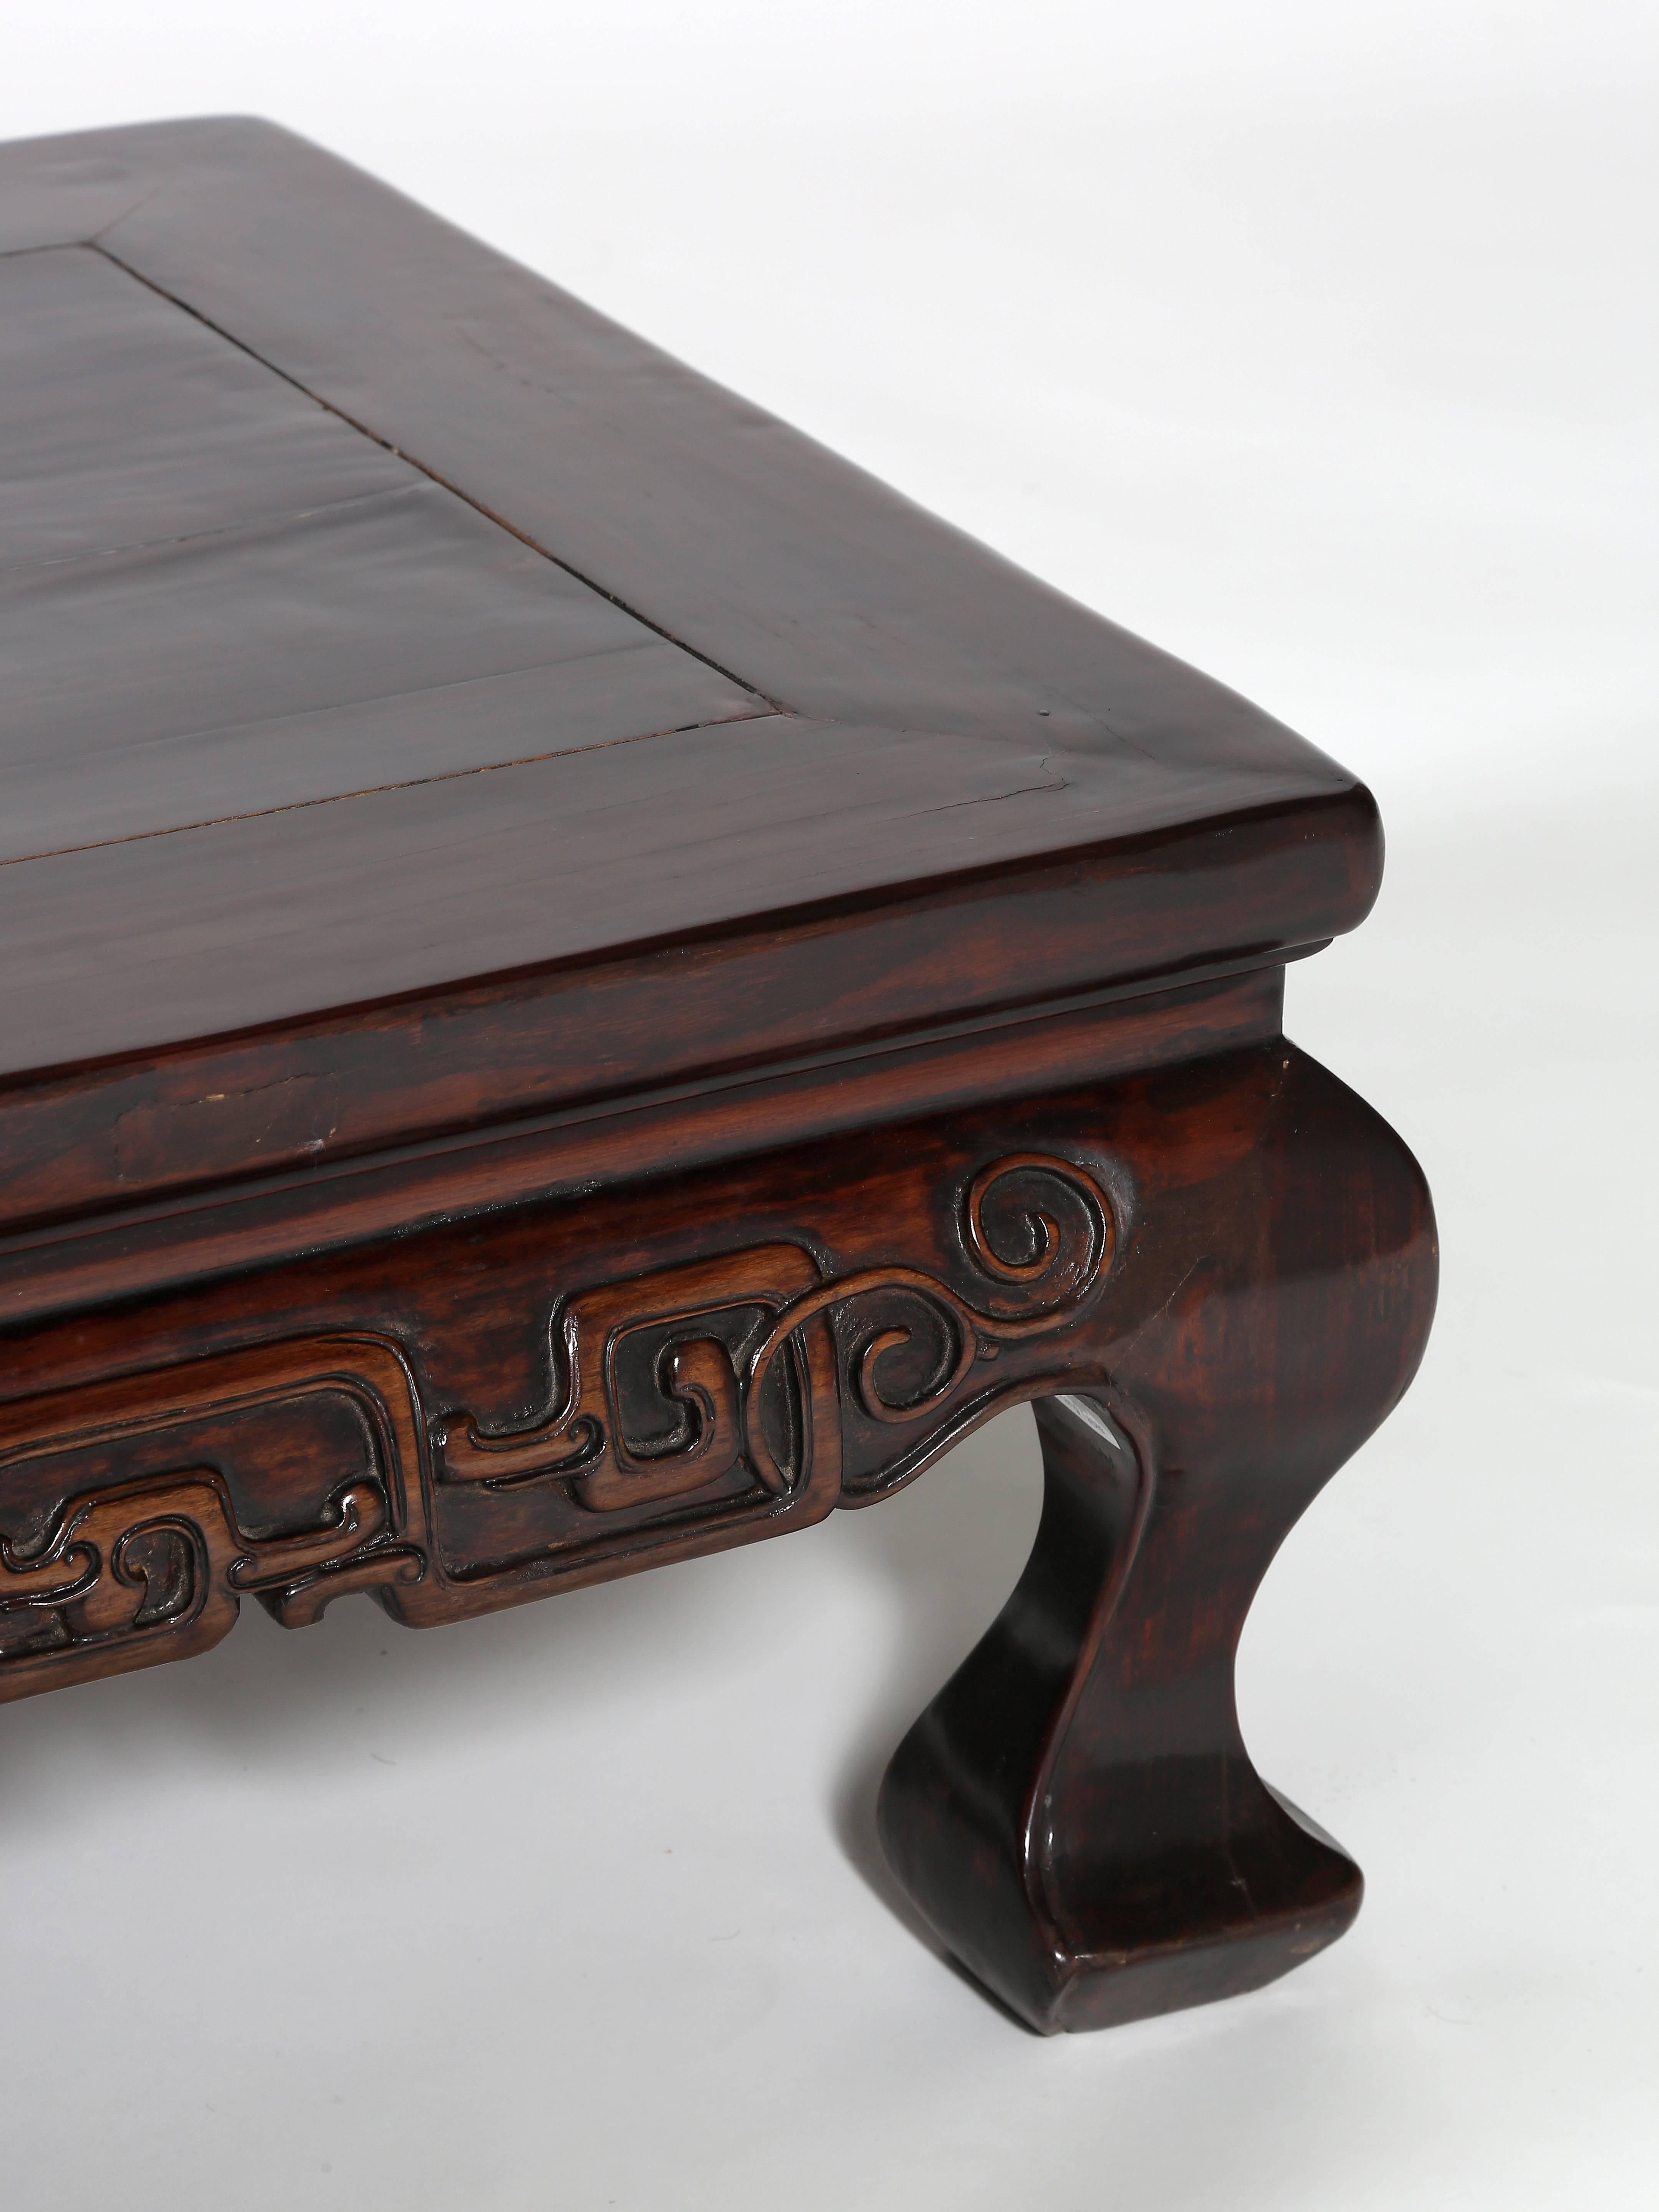 Hand-Crafted Antique 18th Century Chinoiserie Low Kang Table Carved Scroll Work Cabriole Legs